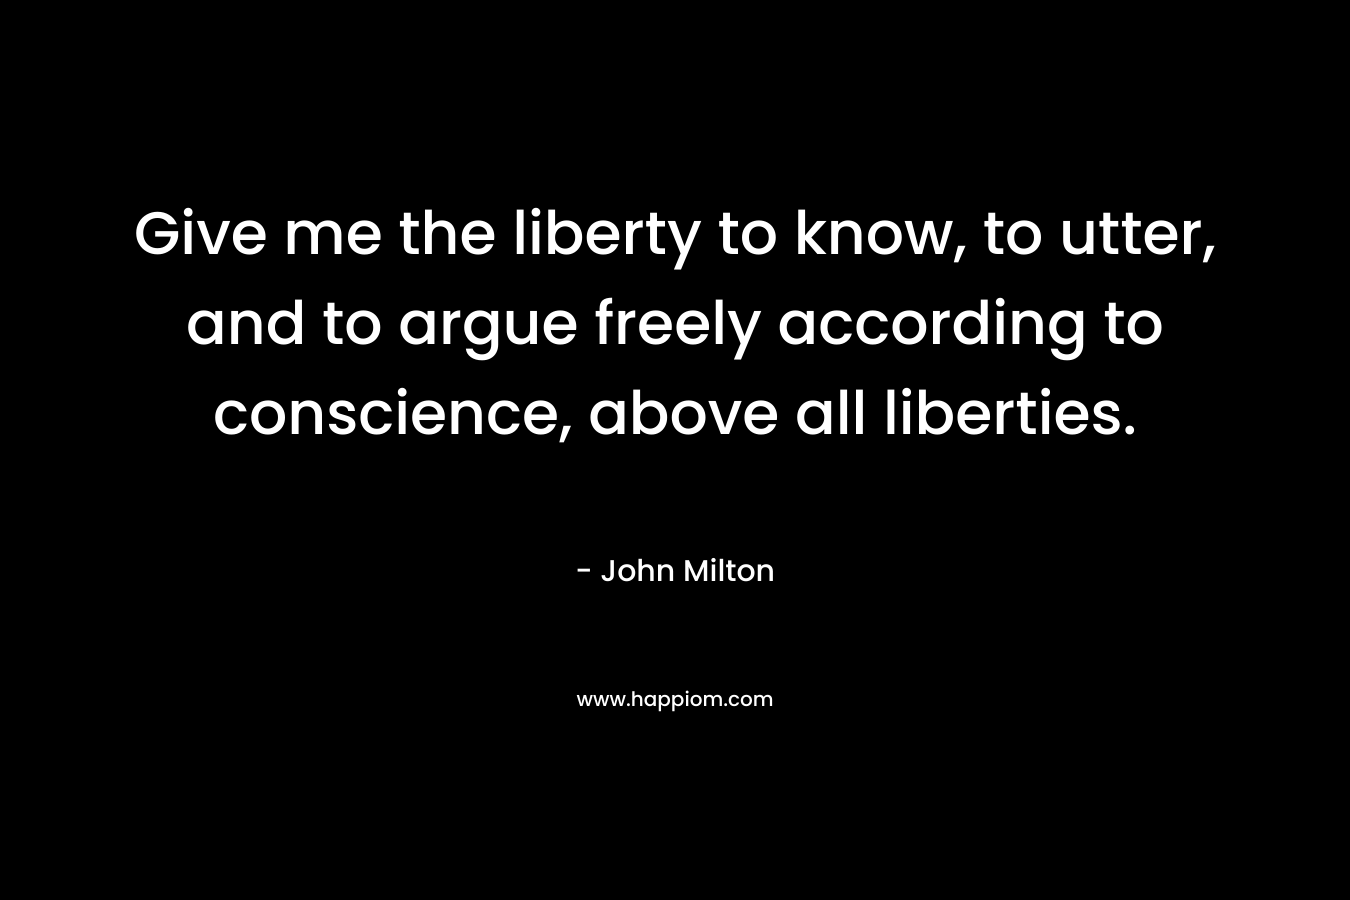 Give me the liberty to know, to utter, and to argue freely according to conscience, above all liberties. – John Milton